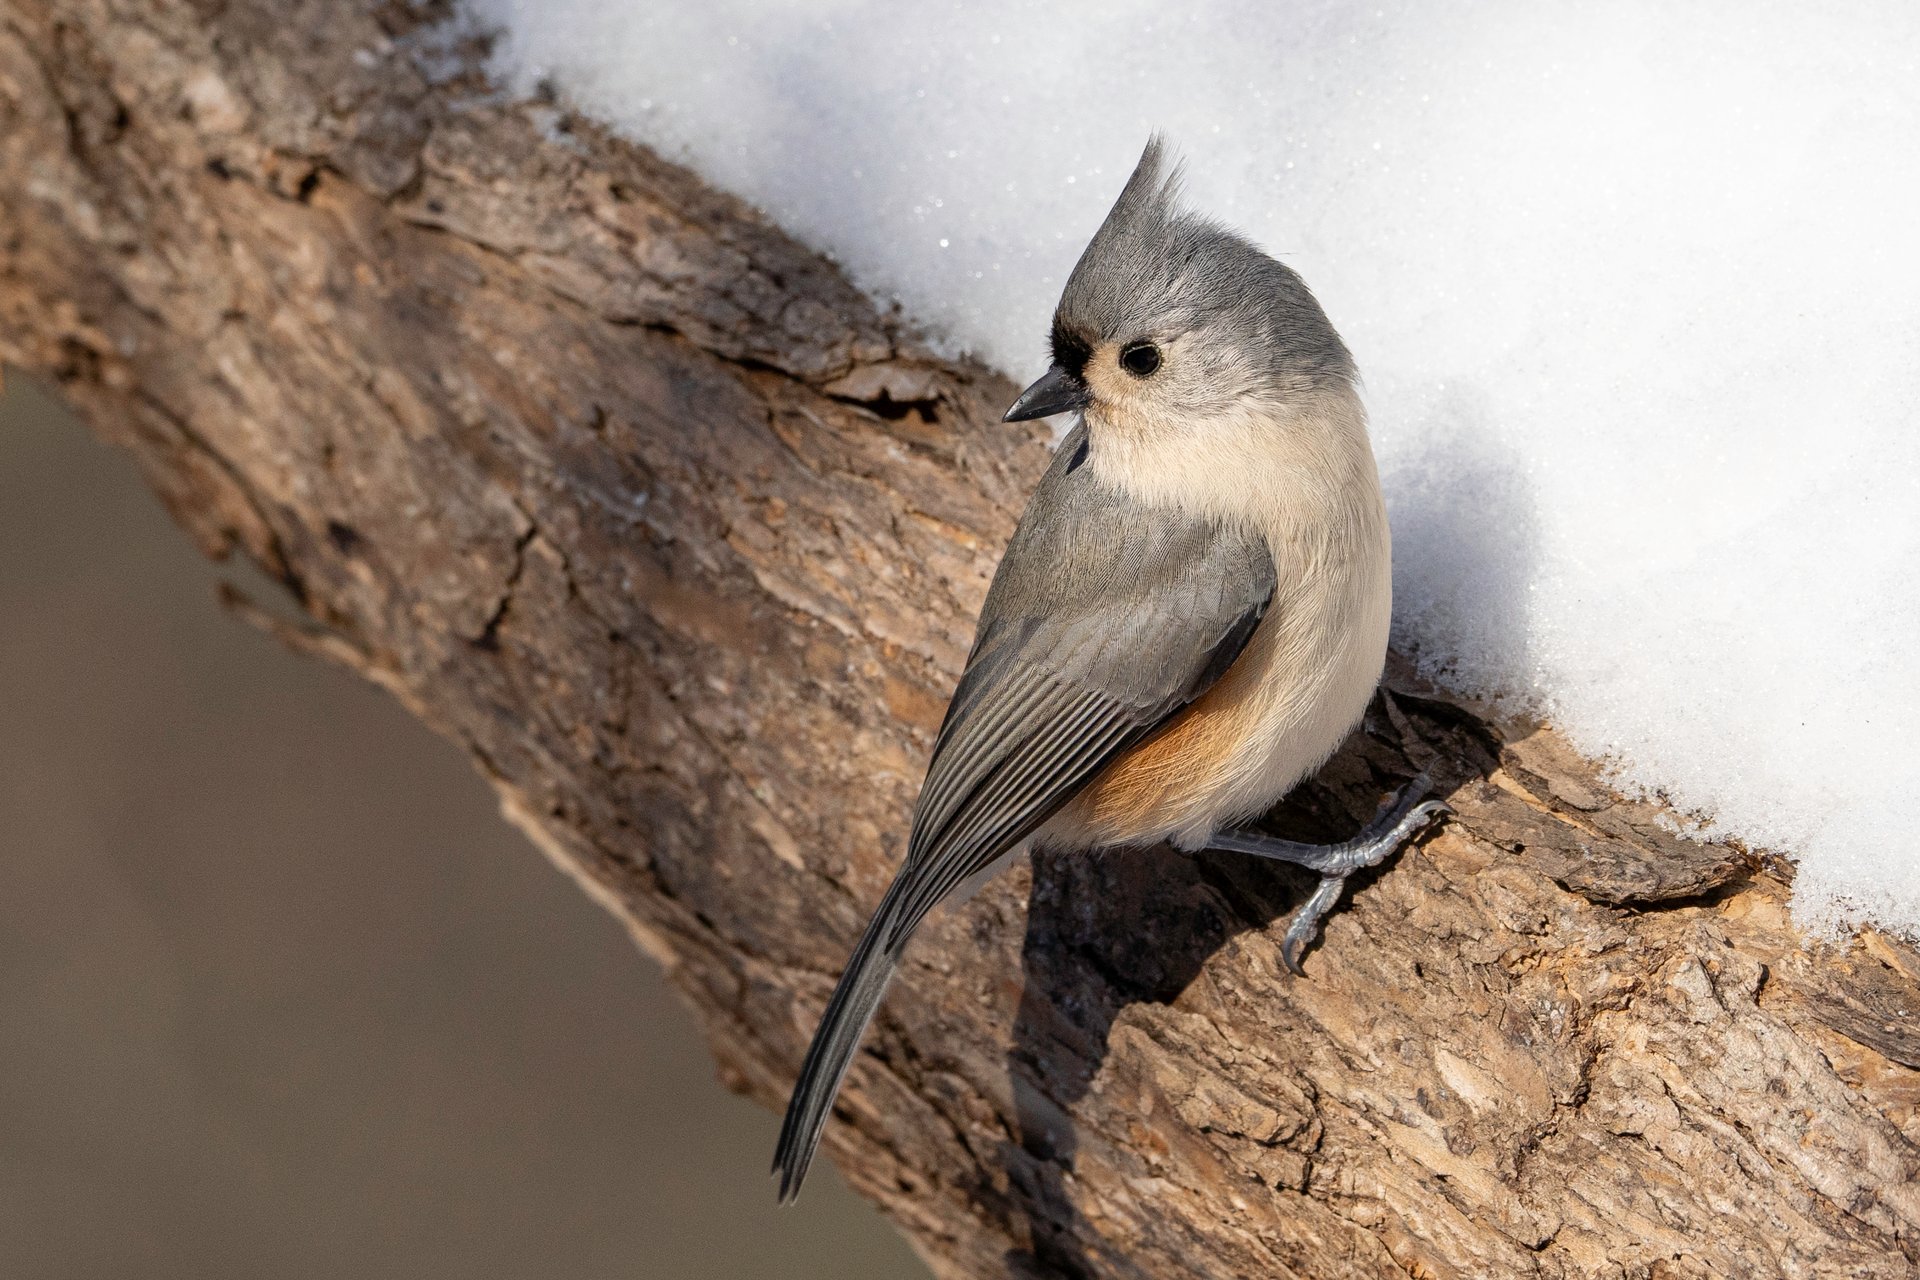 Tufted Titmouse on snowy branch